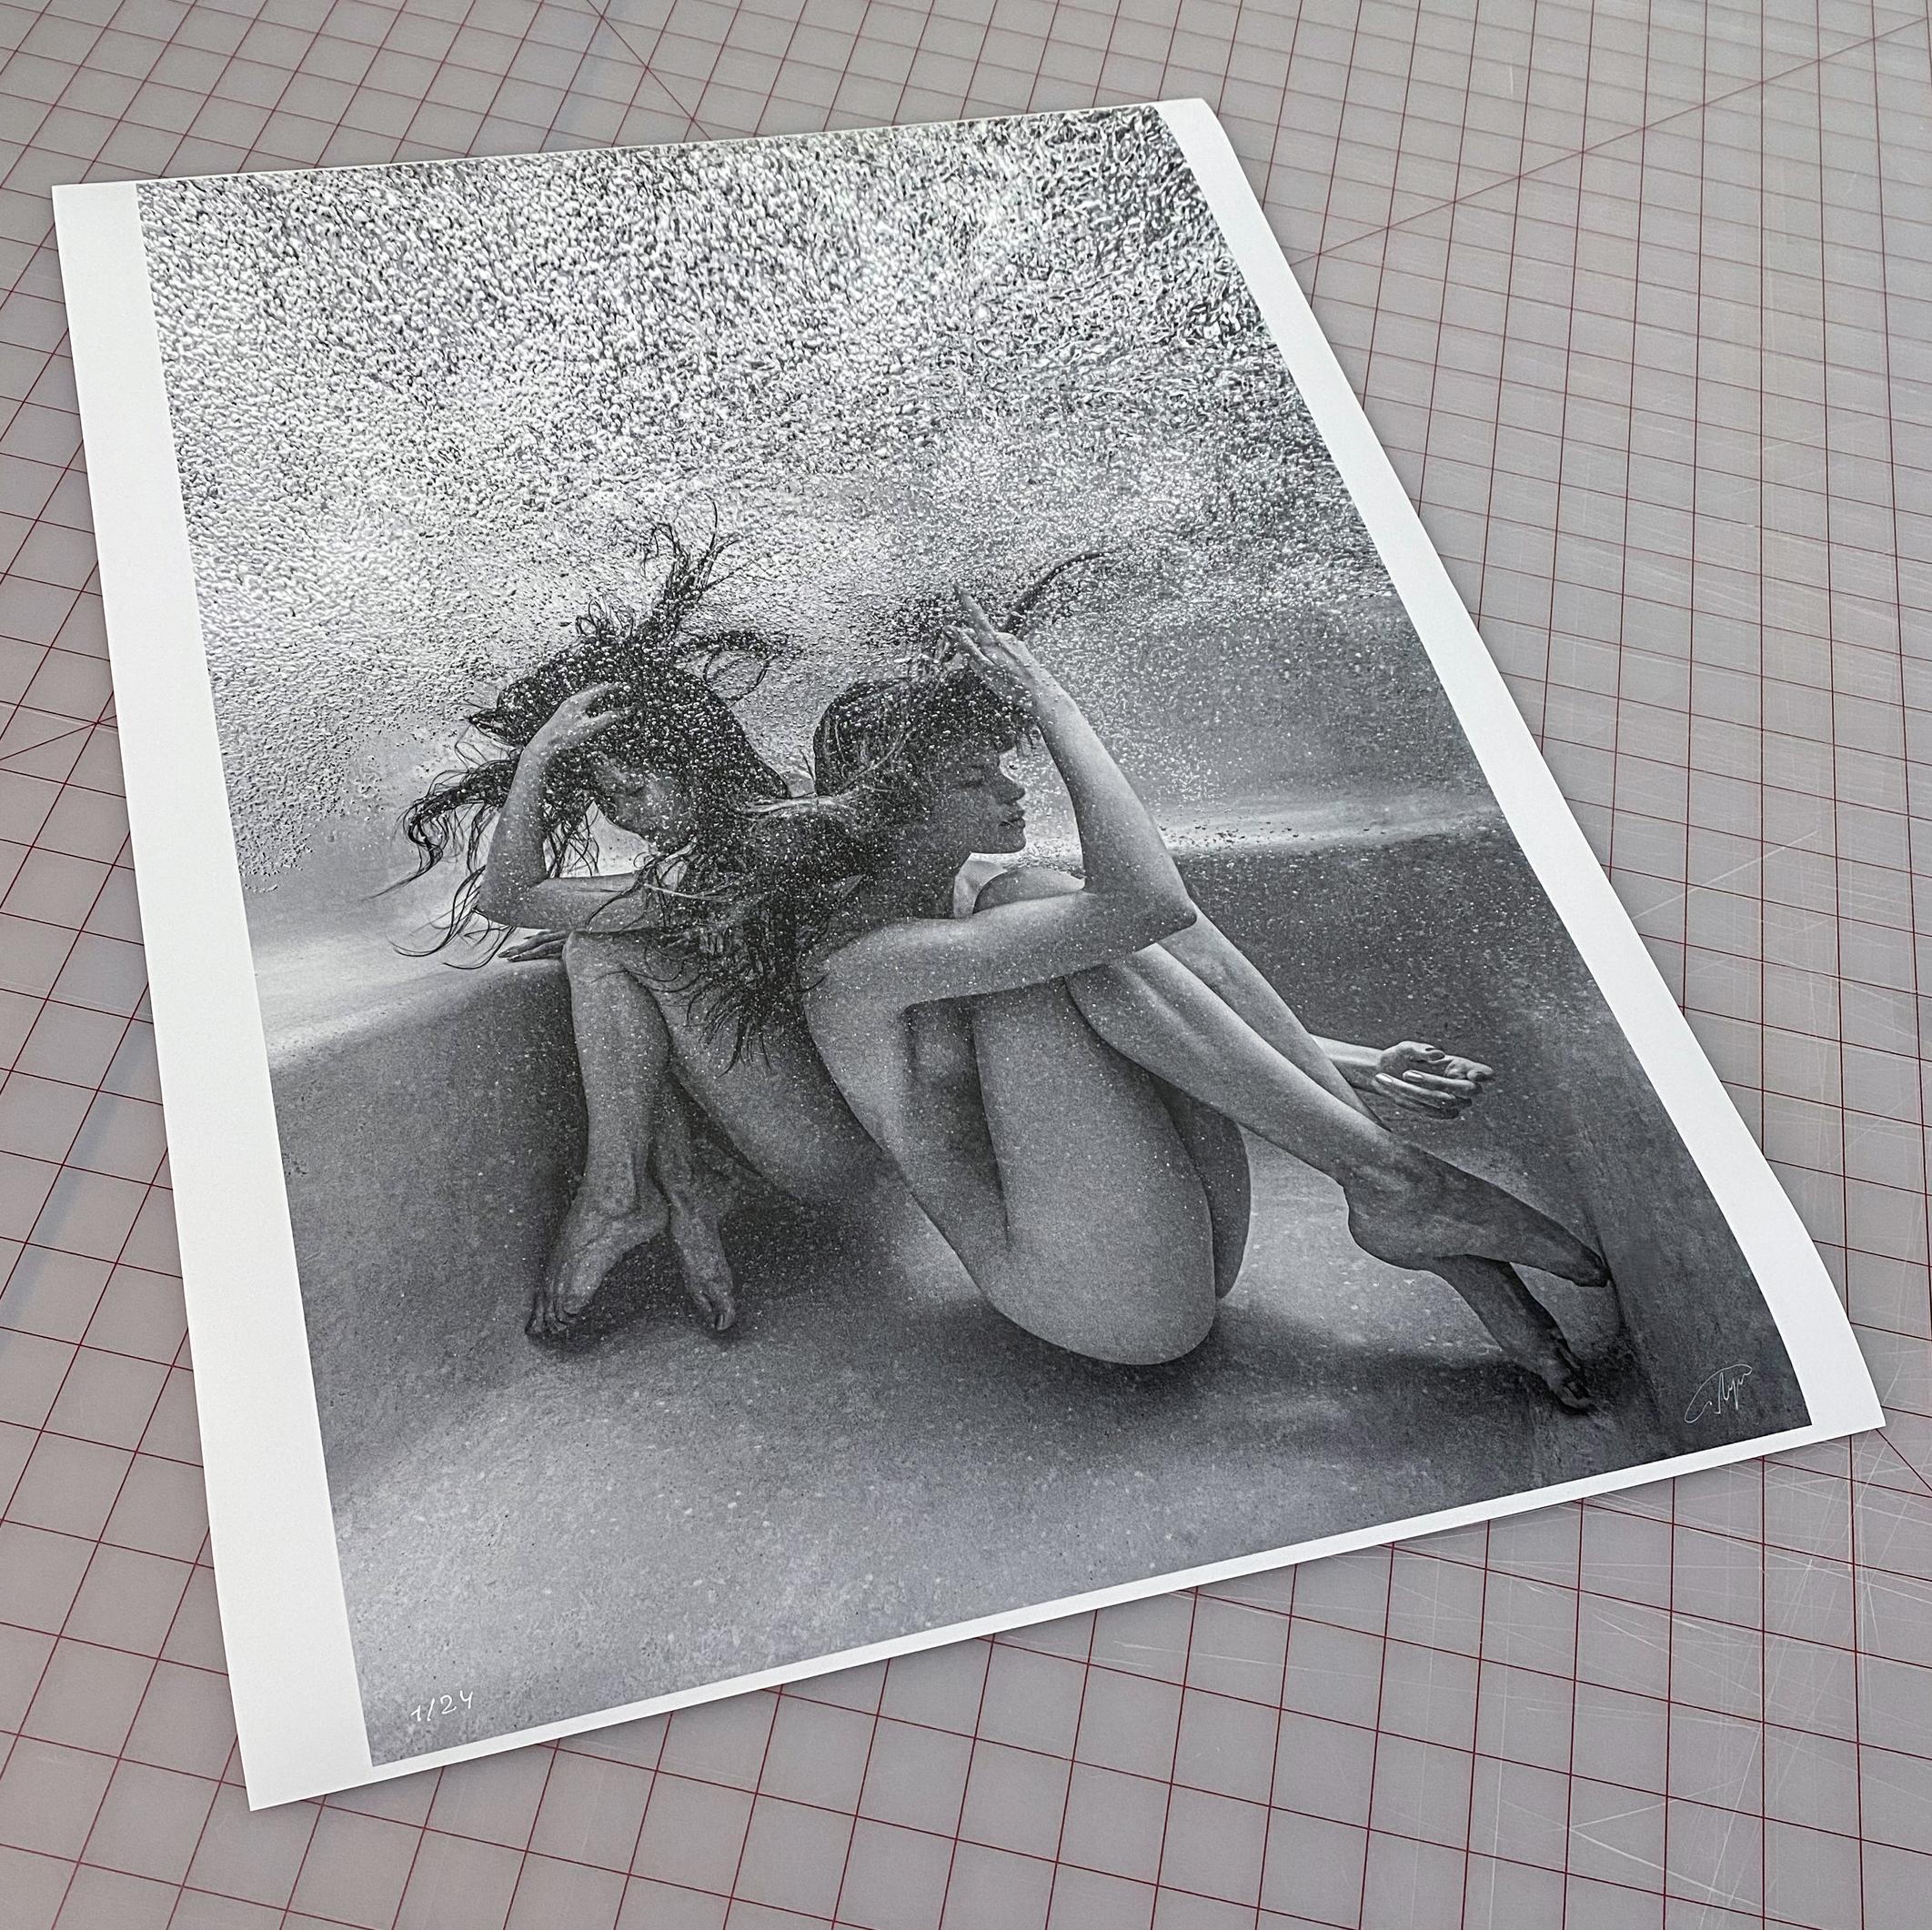 Friday Night - underwater black & white nude photograph - archival pigment 52x35 - Contemporary Photograph by Alex Sher